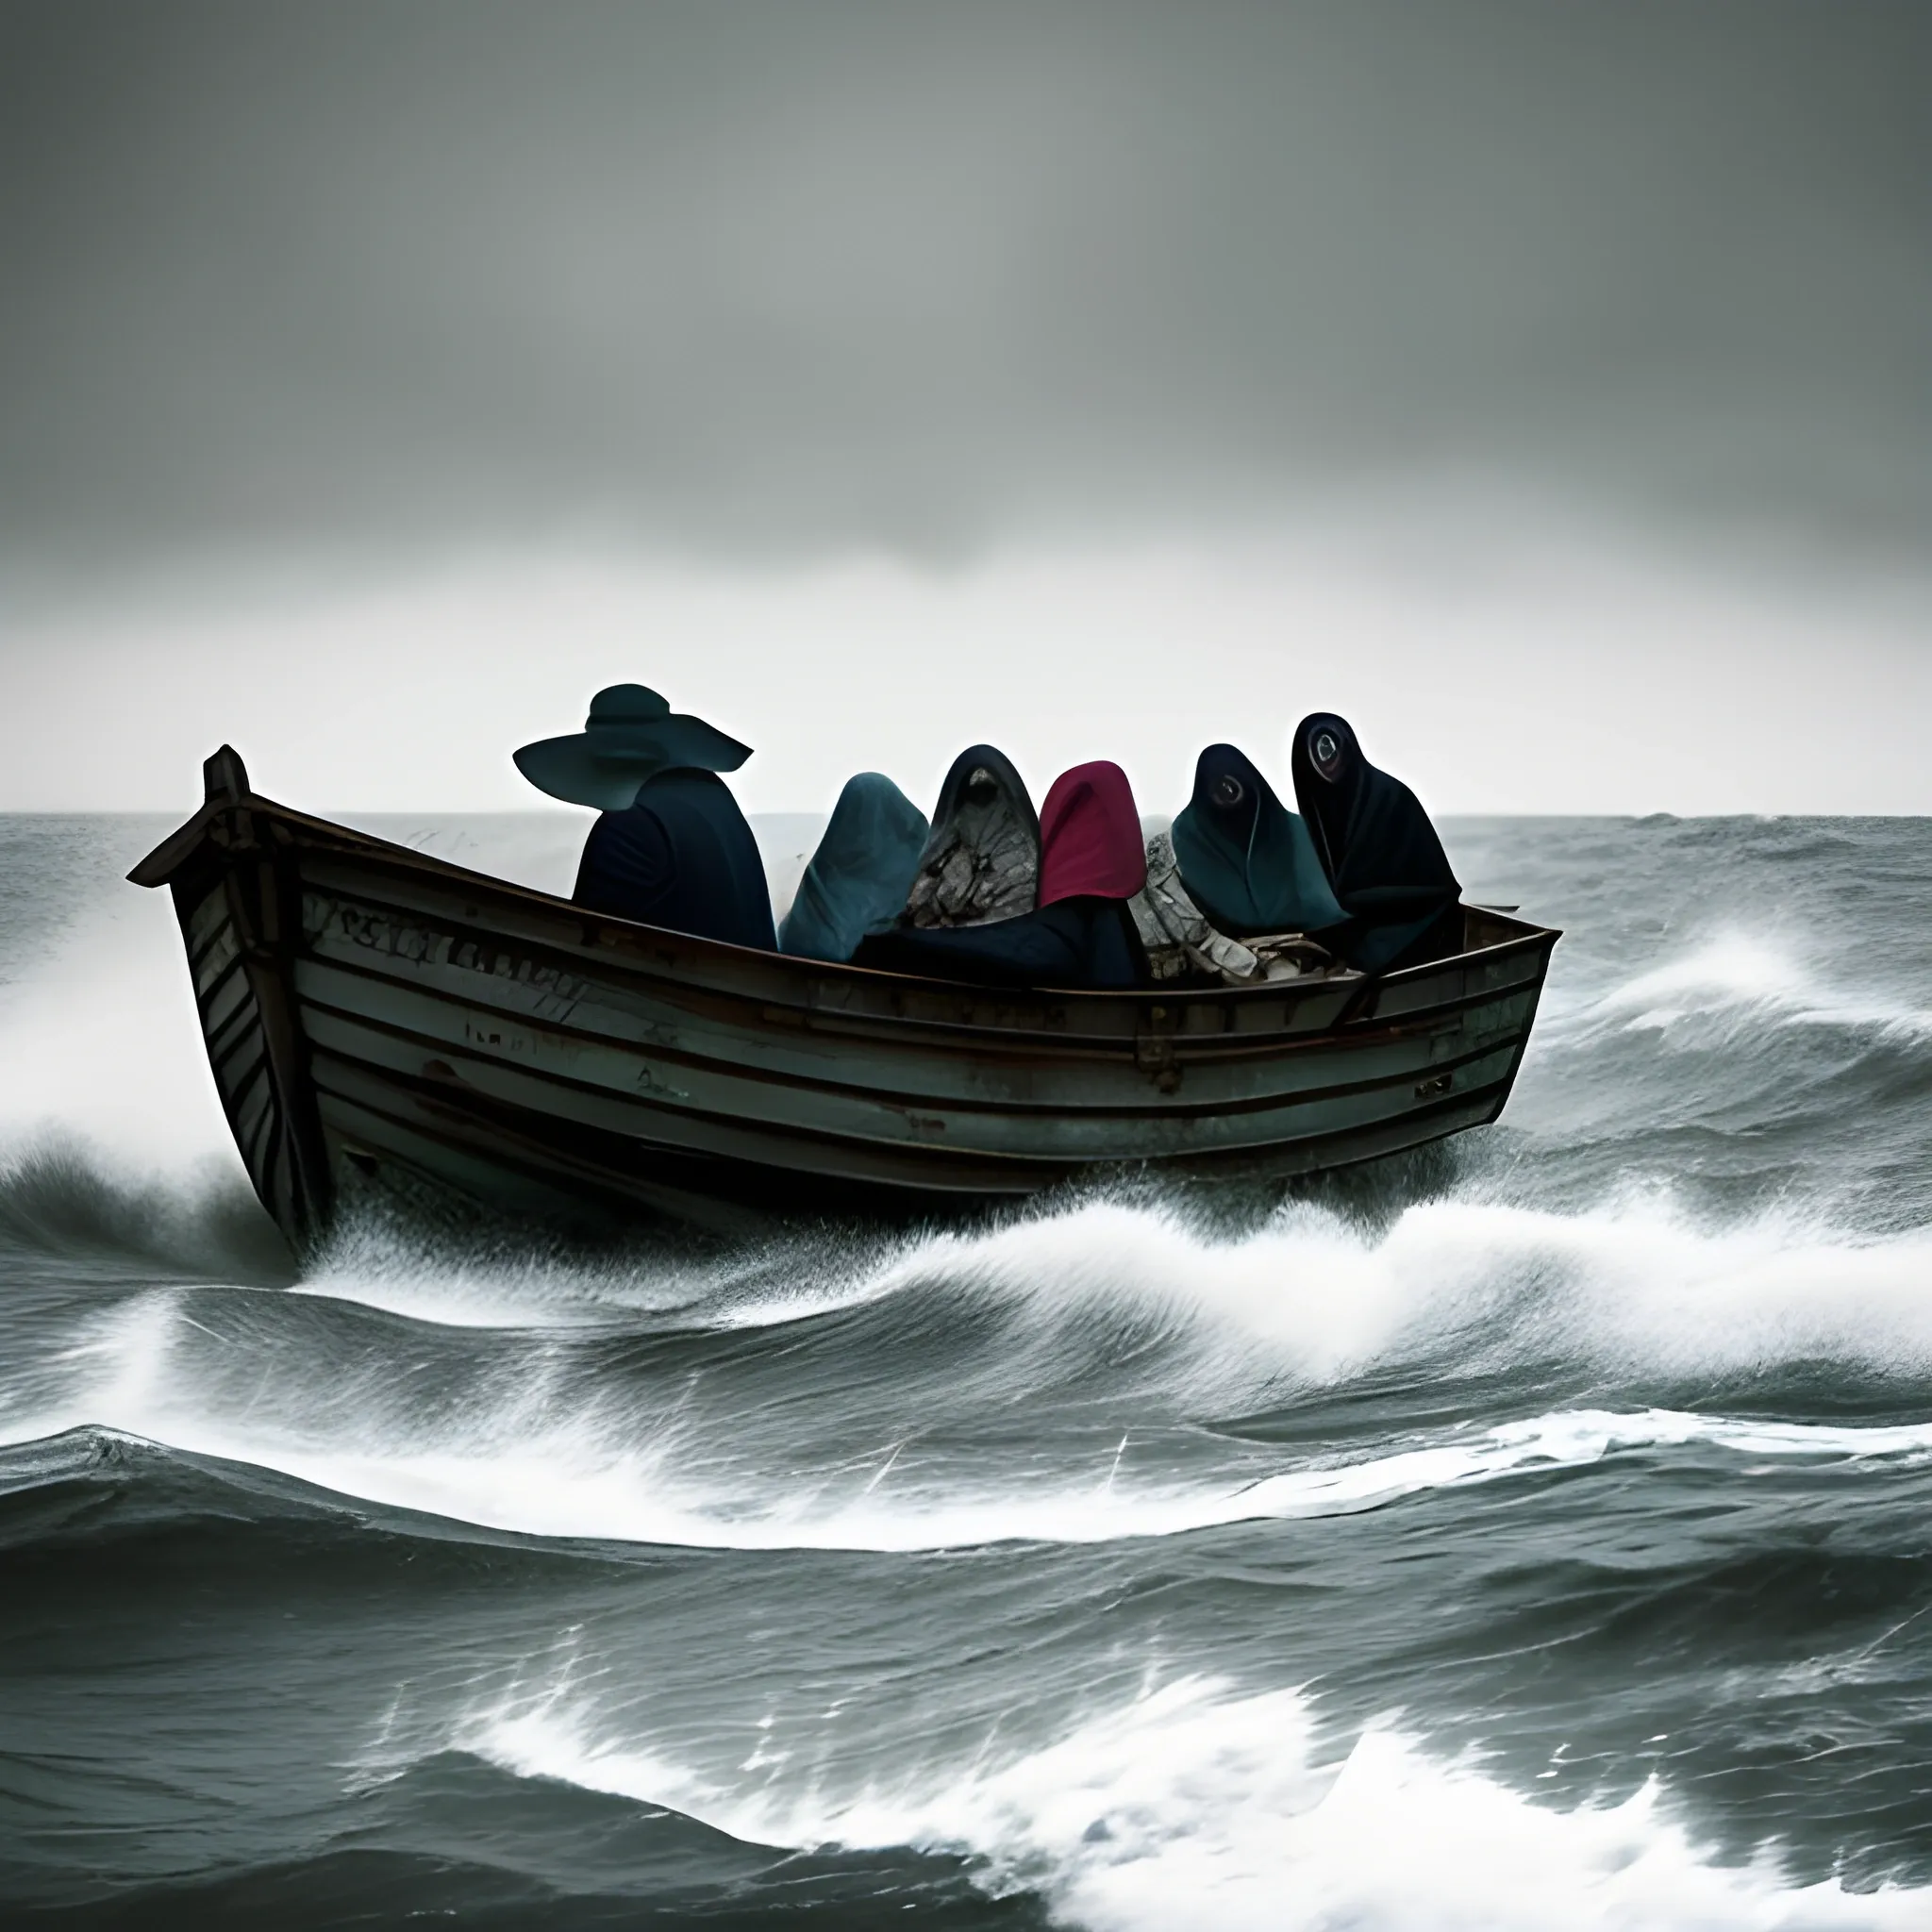 ghost migrants in a boat on the stormy sea, photography